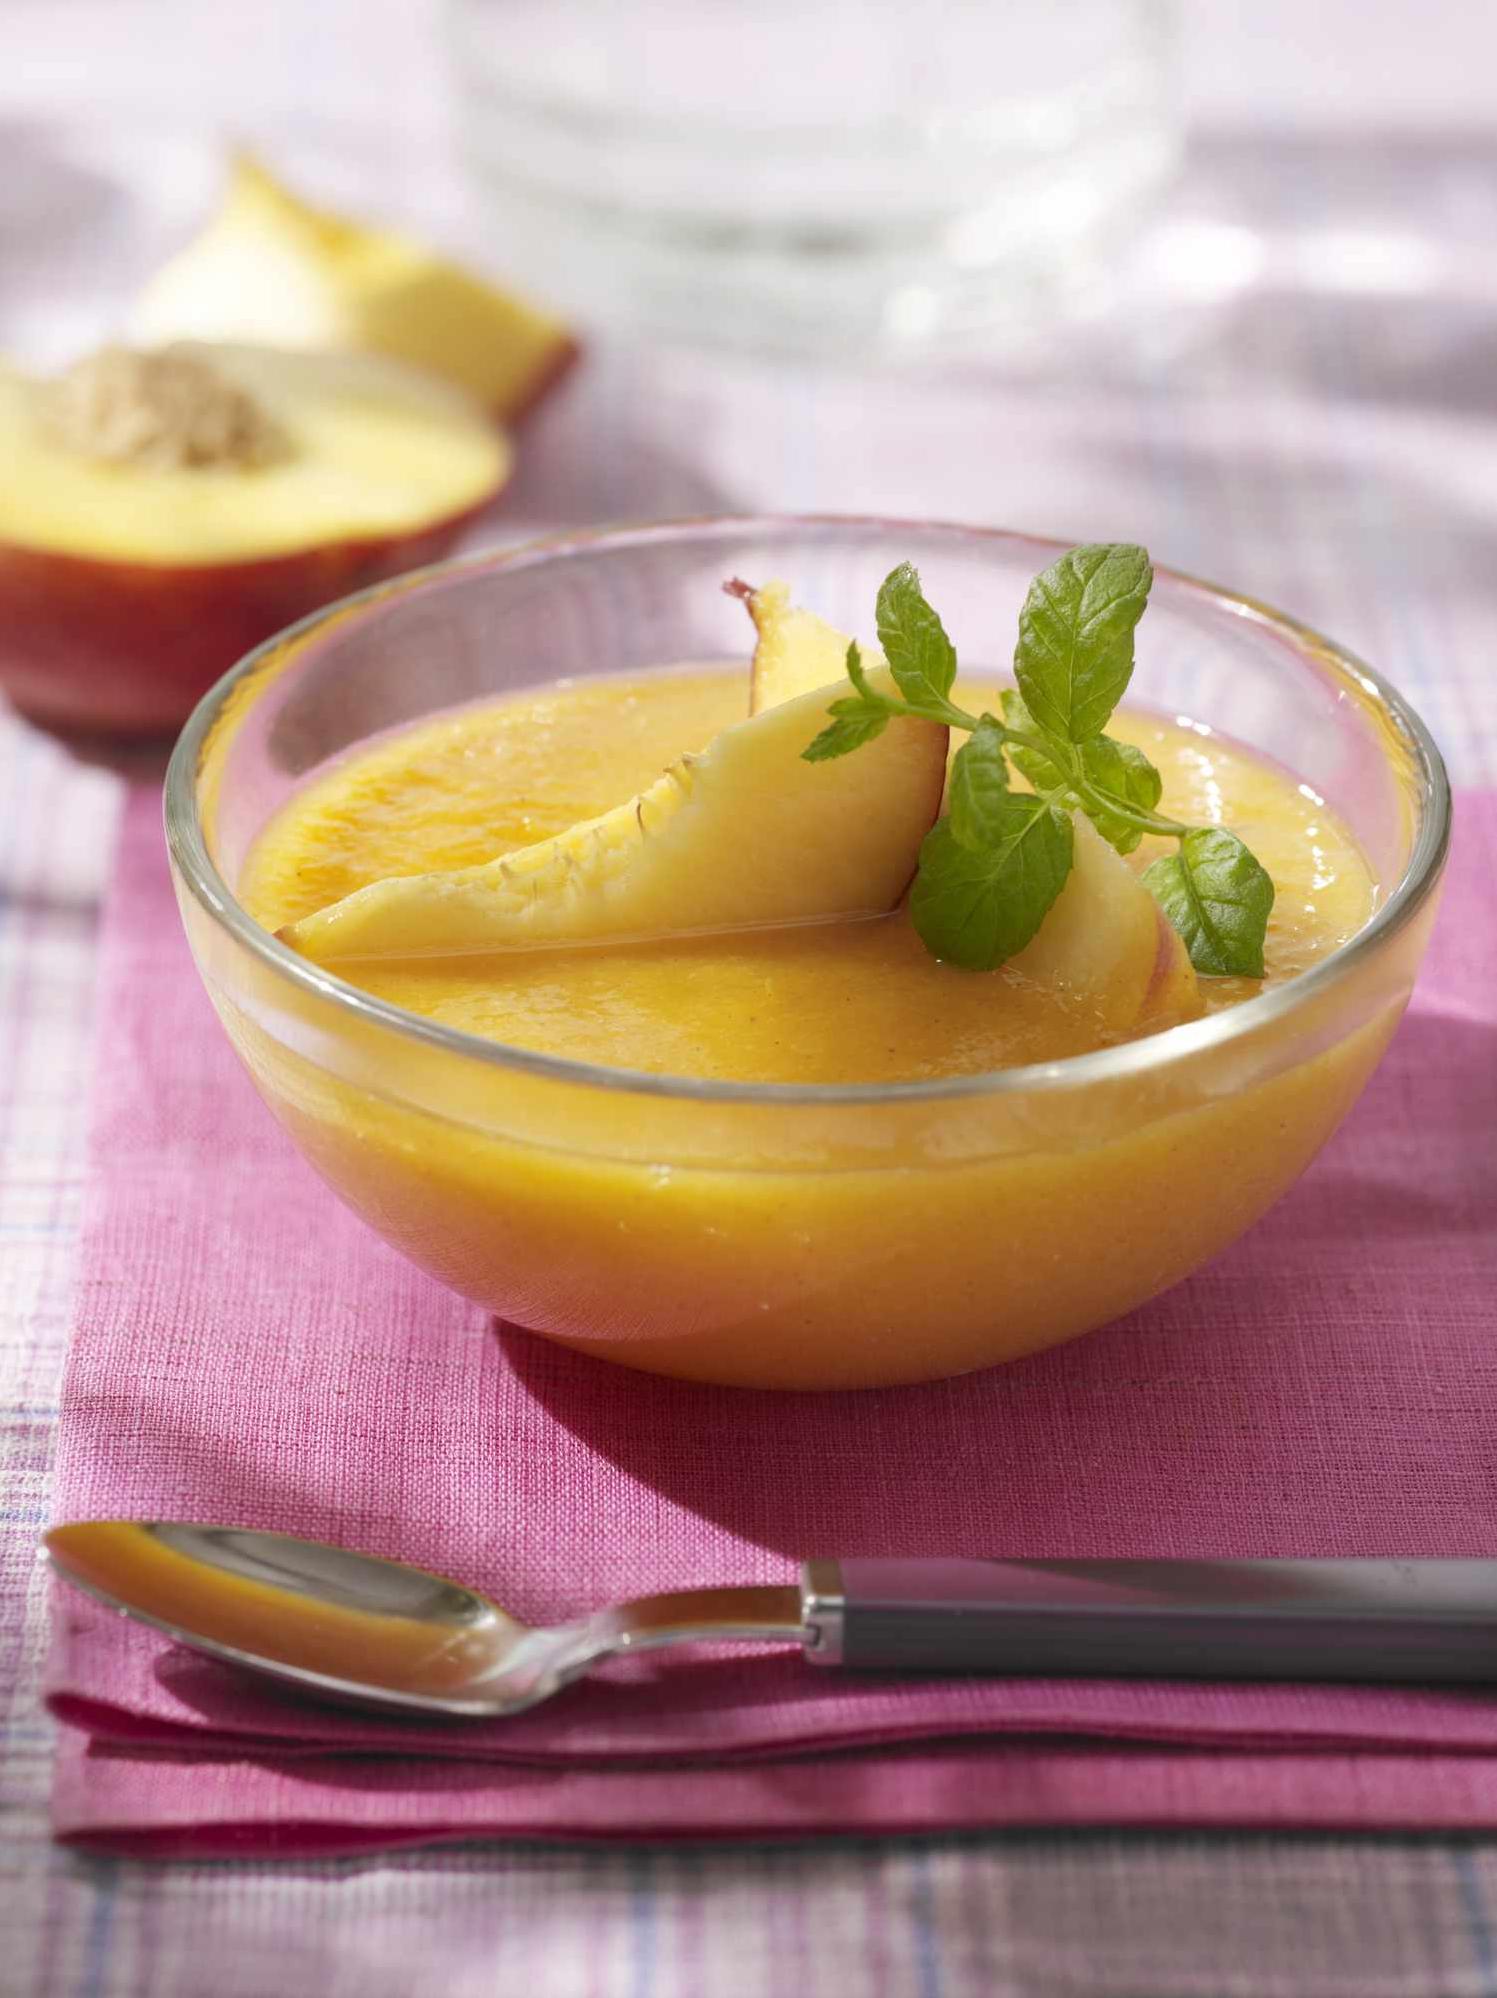  This peach soup is a juicy delight for your taste buds. 🤤💦